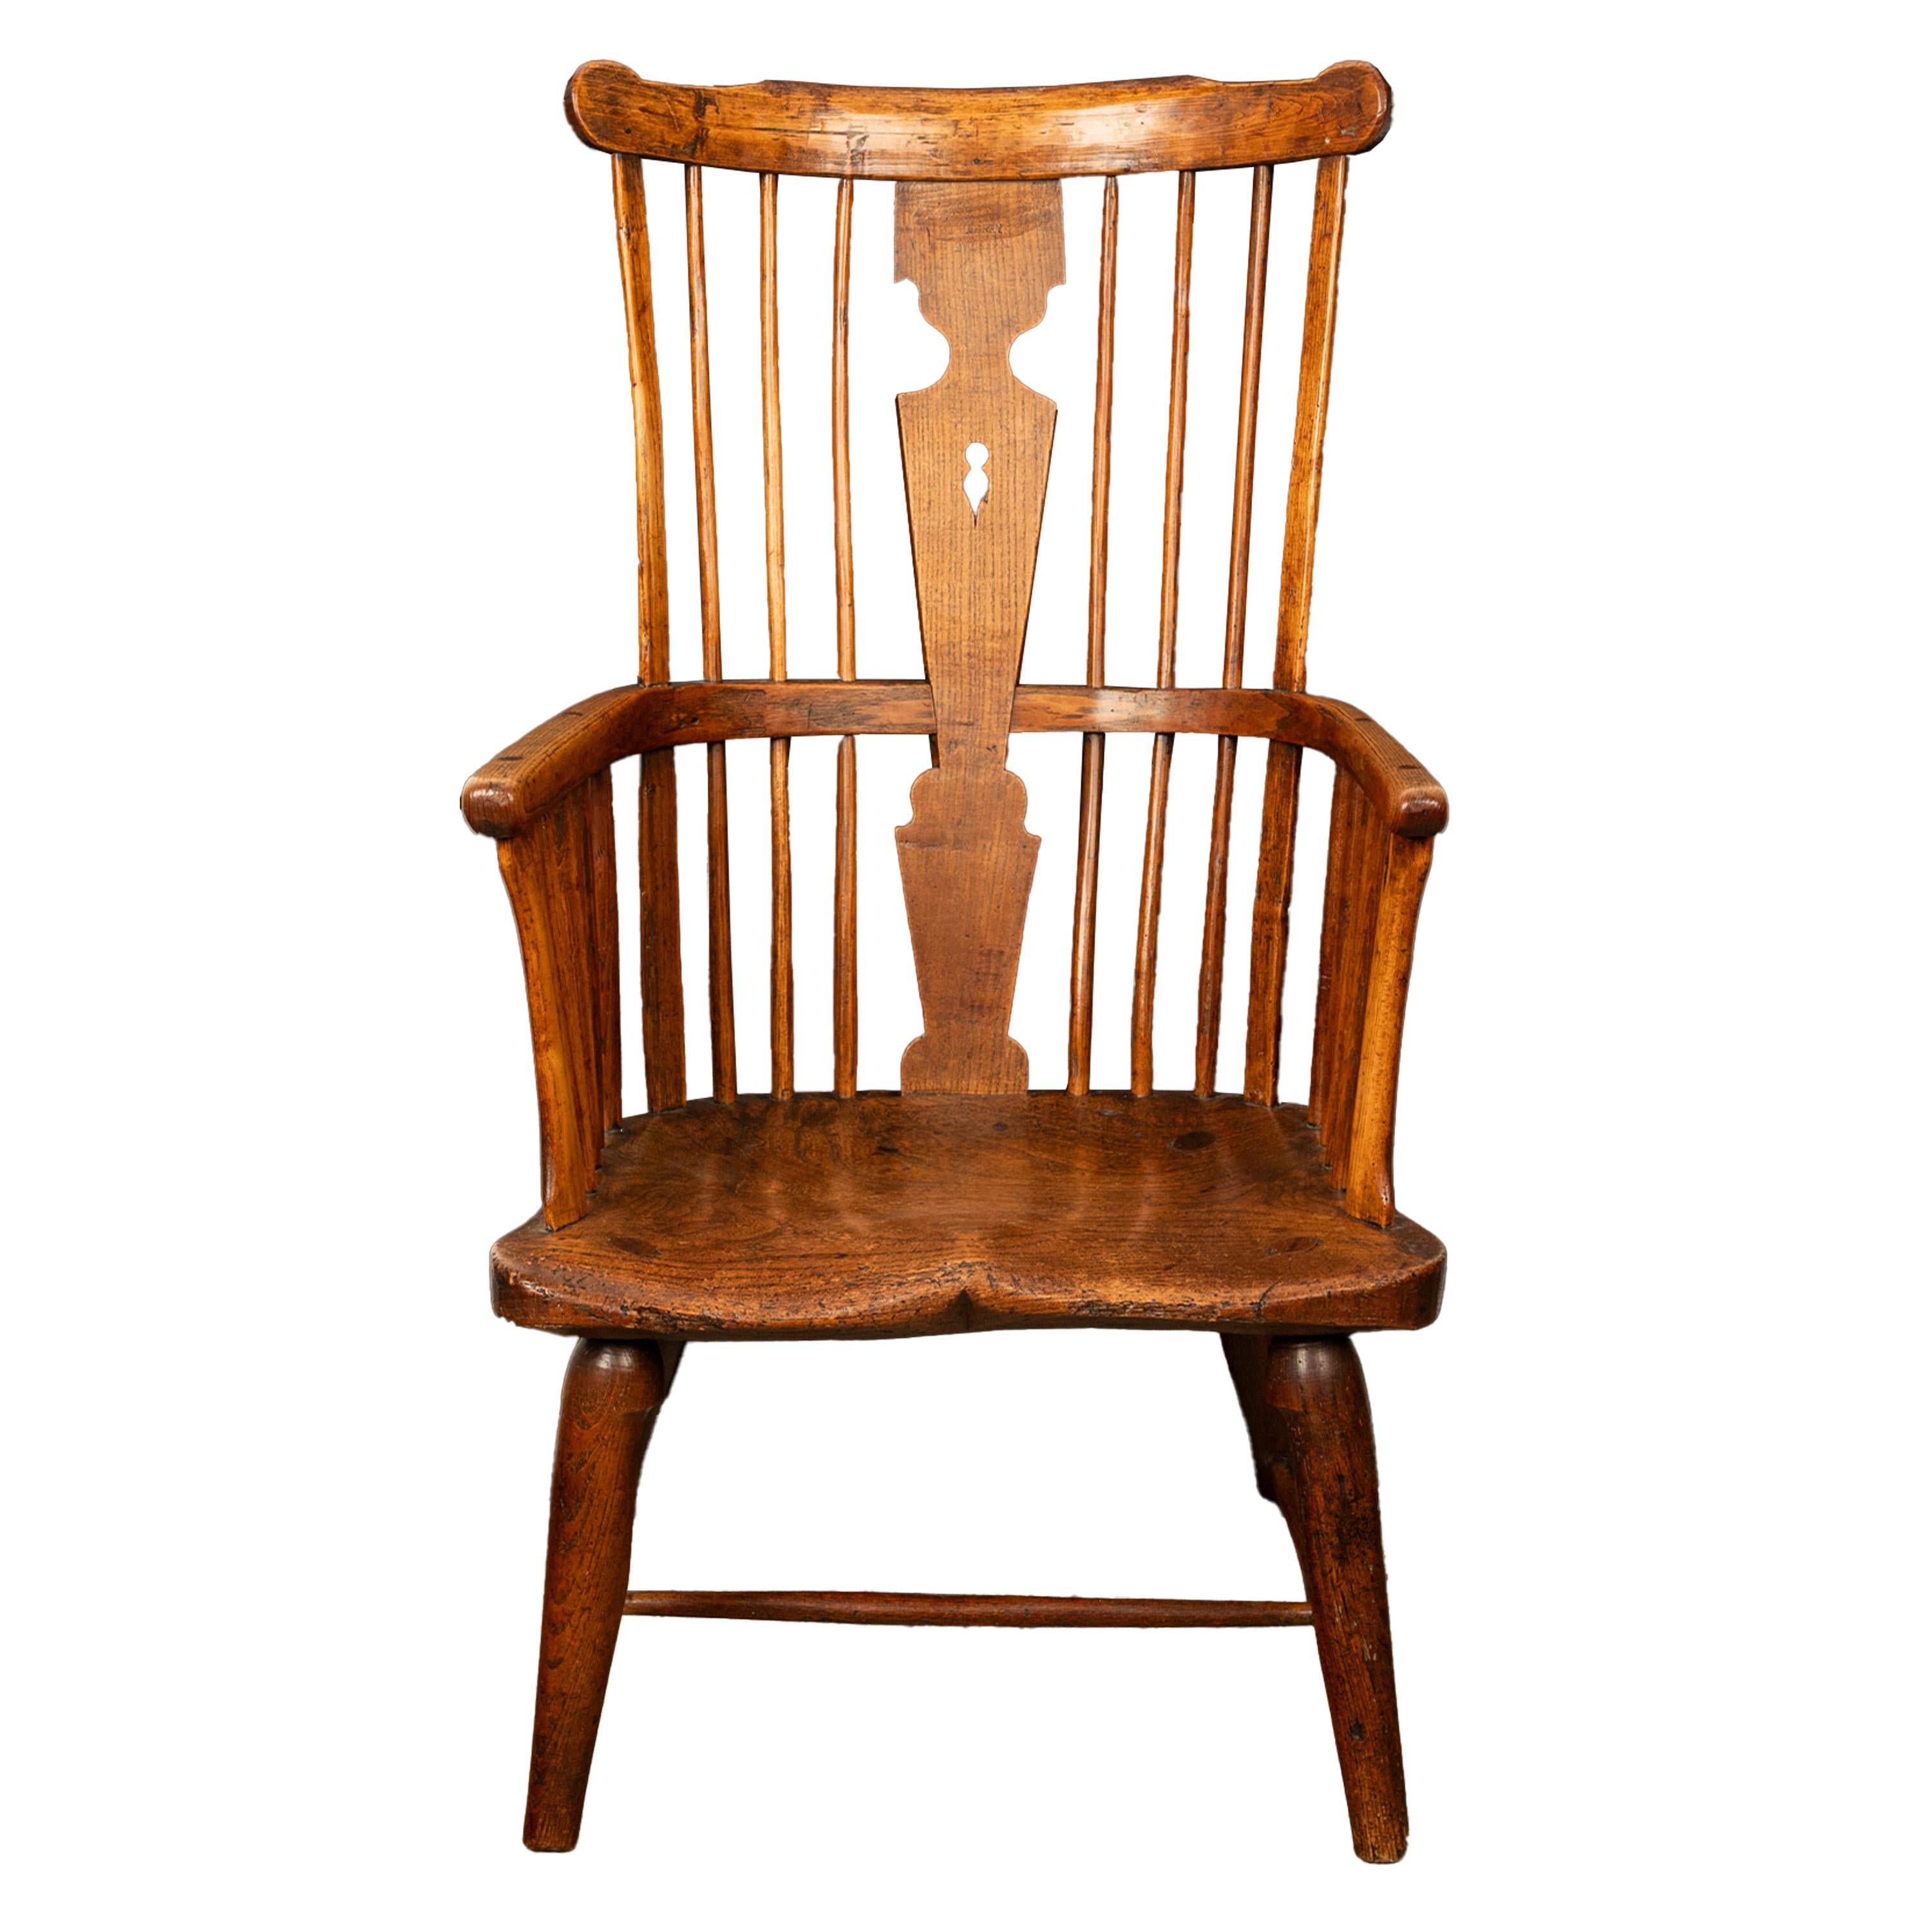 Important Antique Earliest Recorded English Windsor Chair by Kerry Evesham 1793 For Sale 3